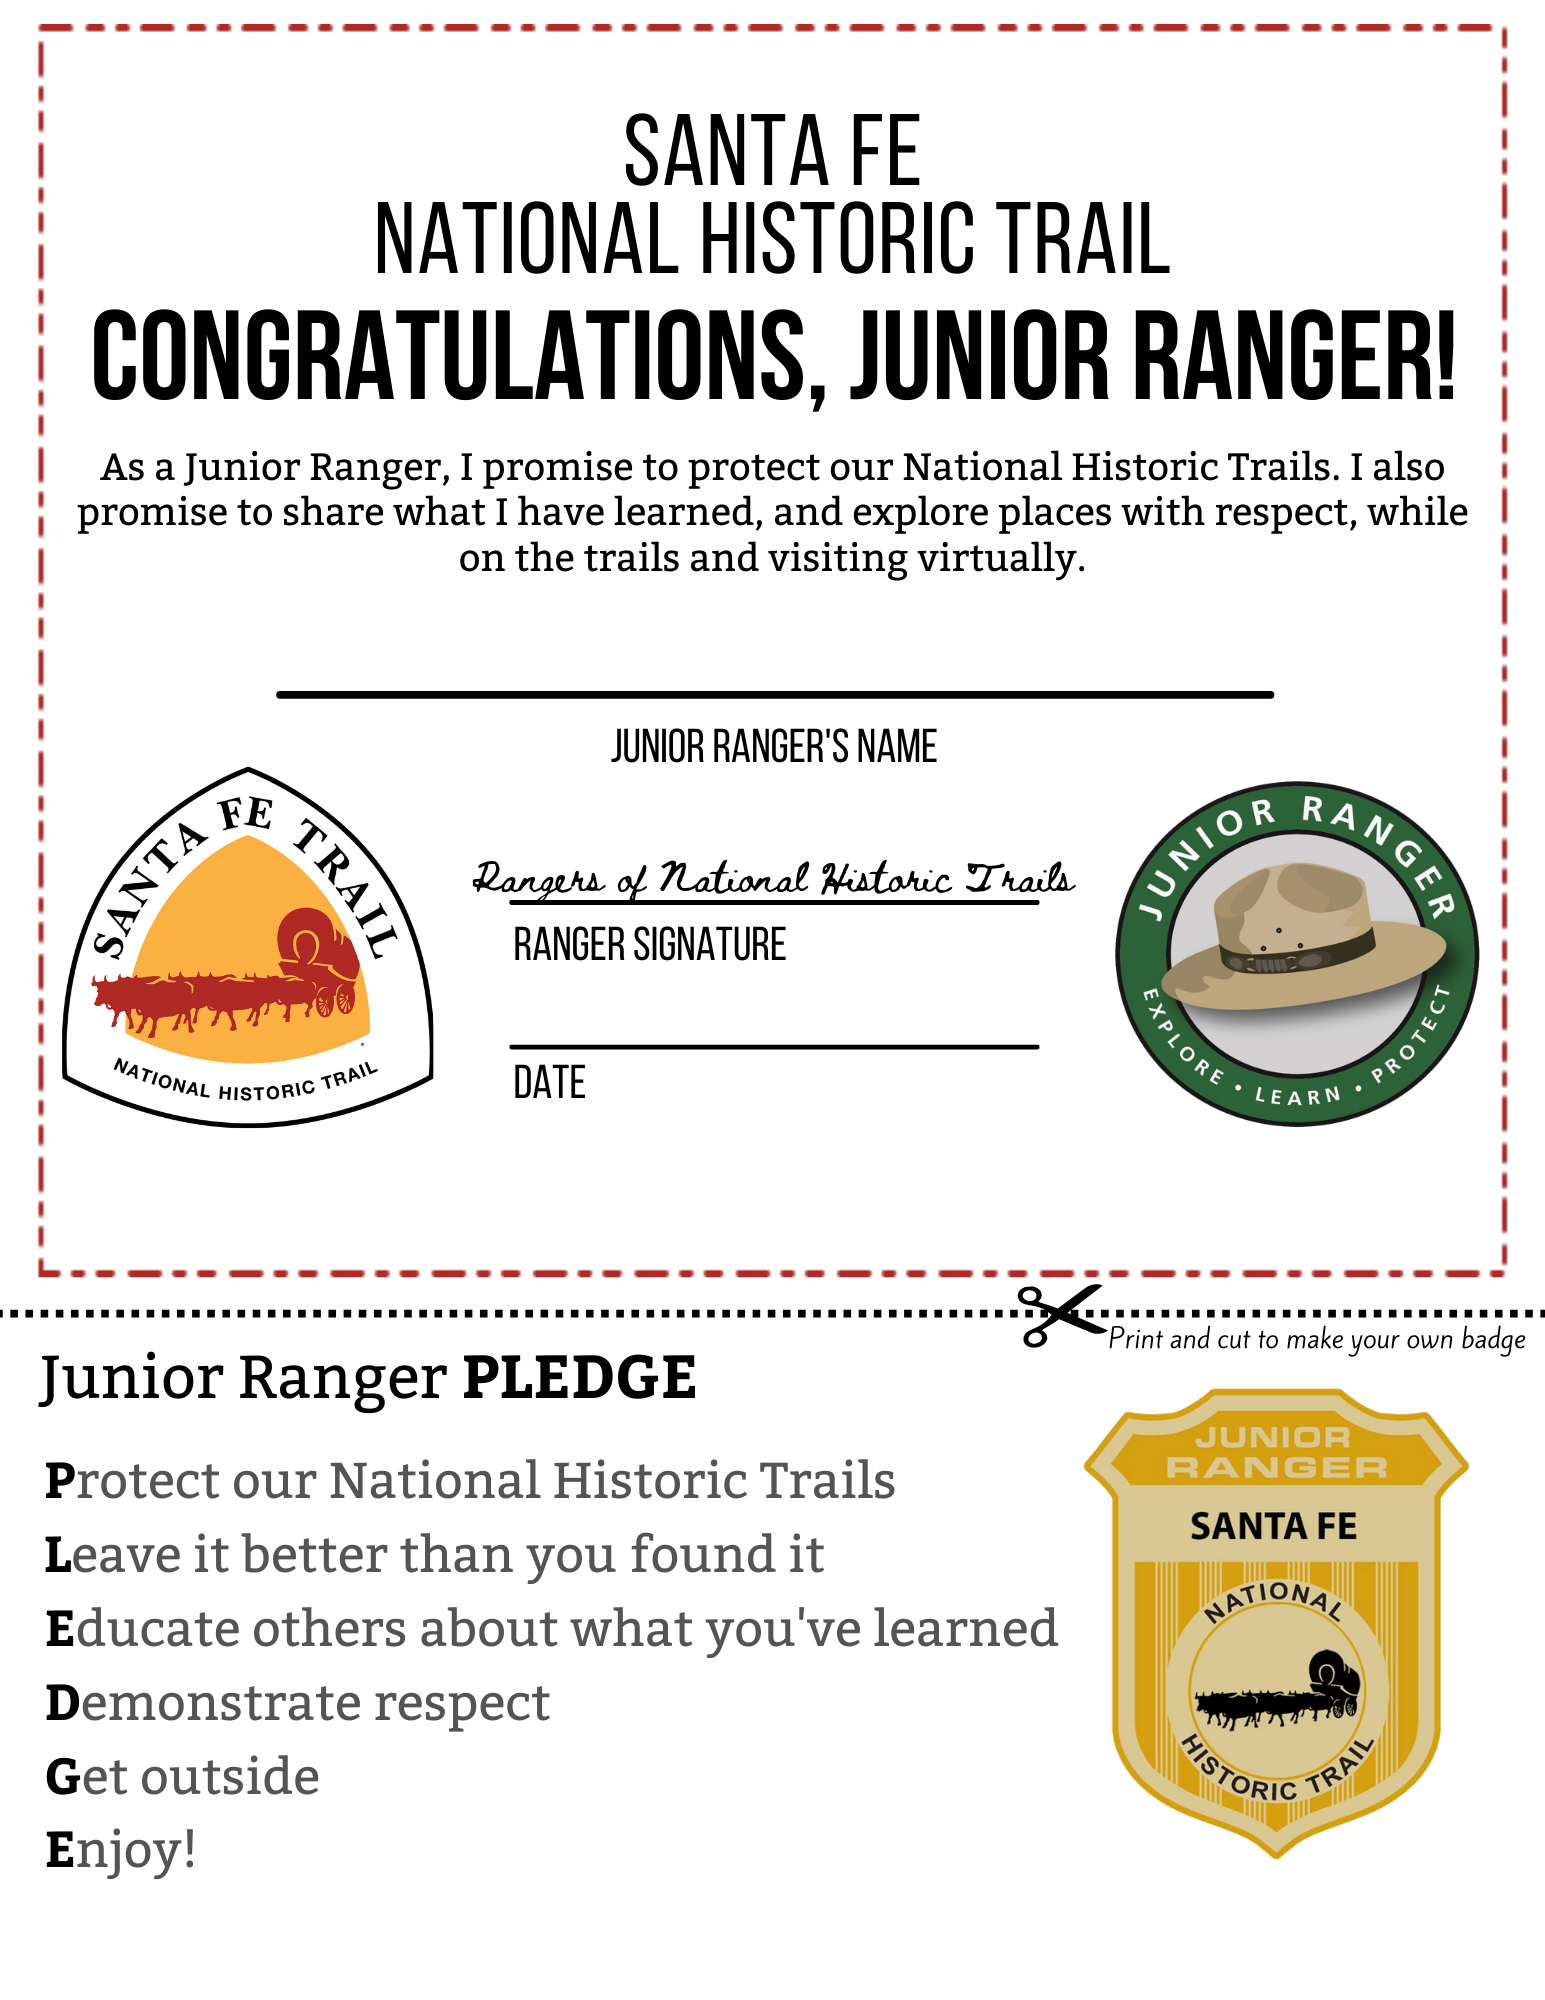 A certificate with an image of a junior ranger badge.